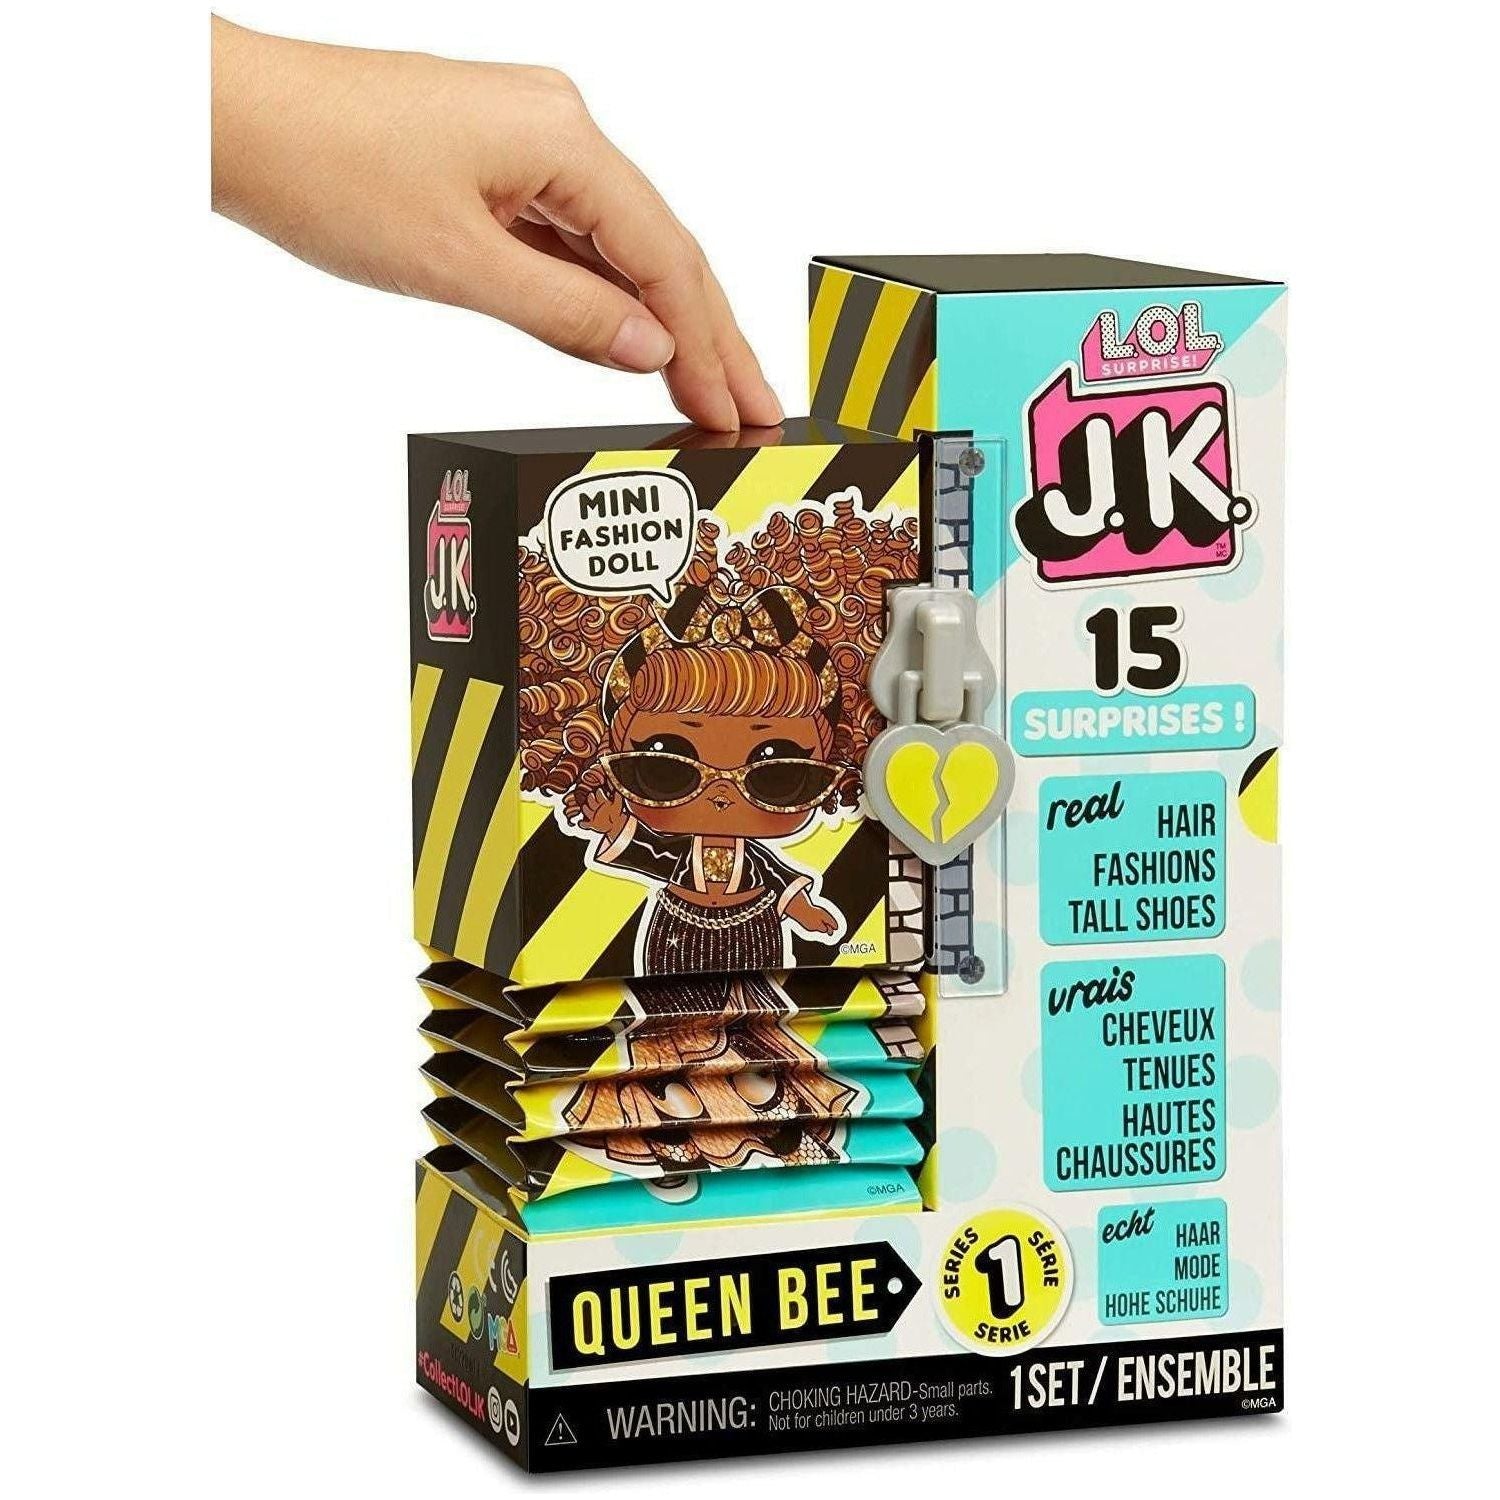 L.O.L Surprise JK Queen Bee Mini Fashion Doll With 15 Surprises - BumbleToys - 5-7 Years, Arabic Triangle Trading, Dolls, Fashion Dolls & Accessories, Girls, L.O.L